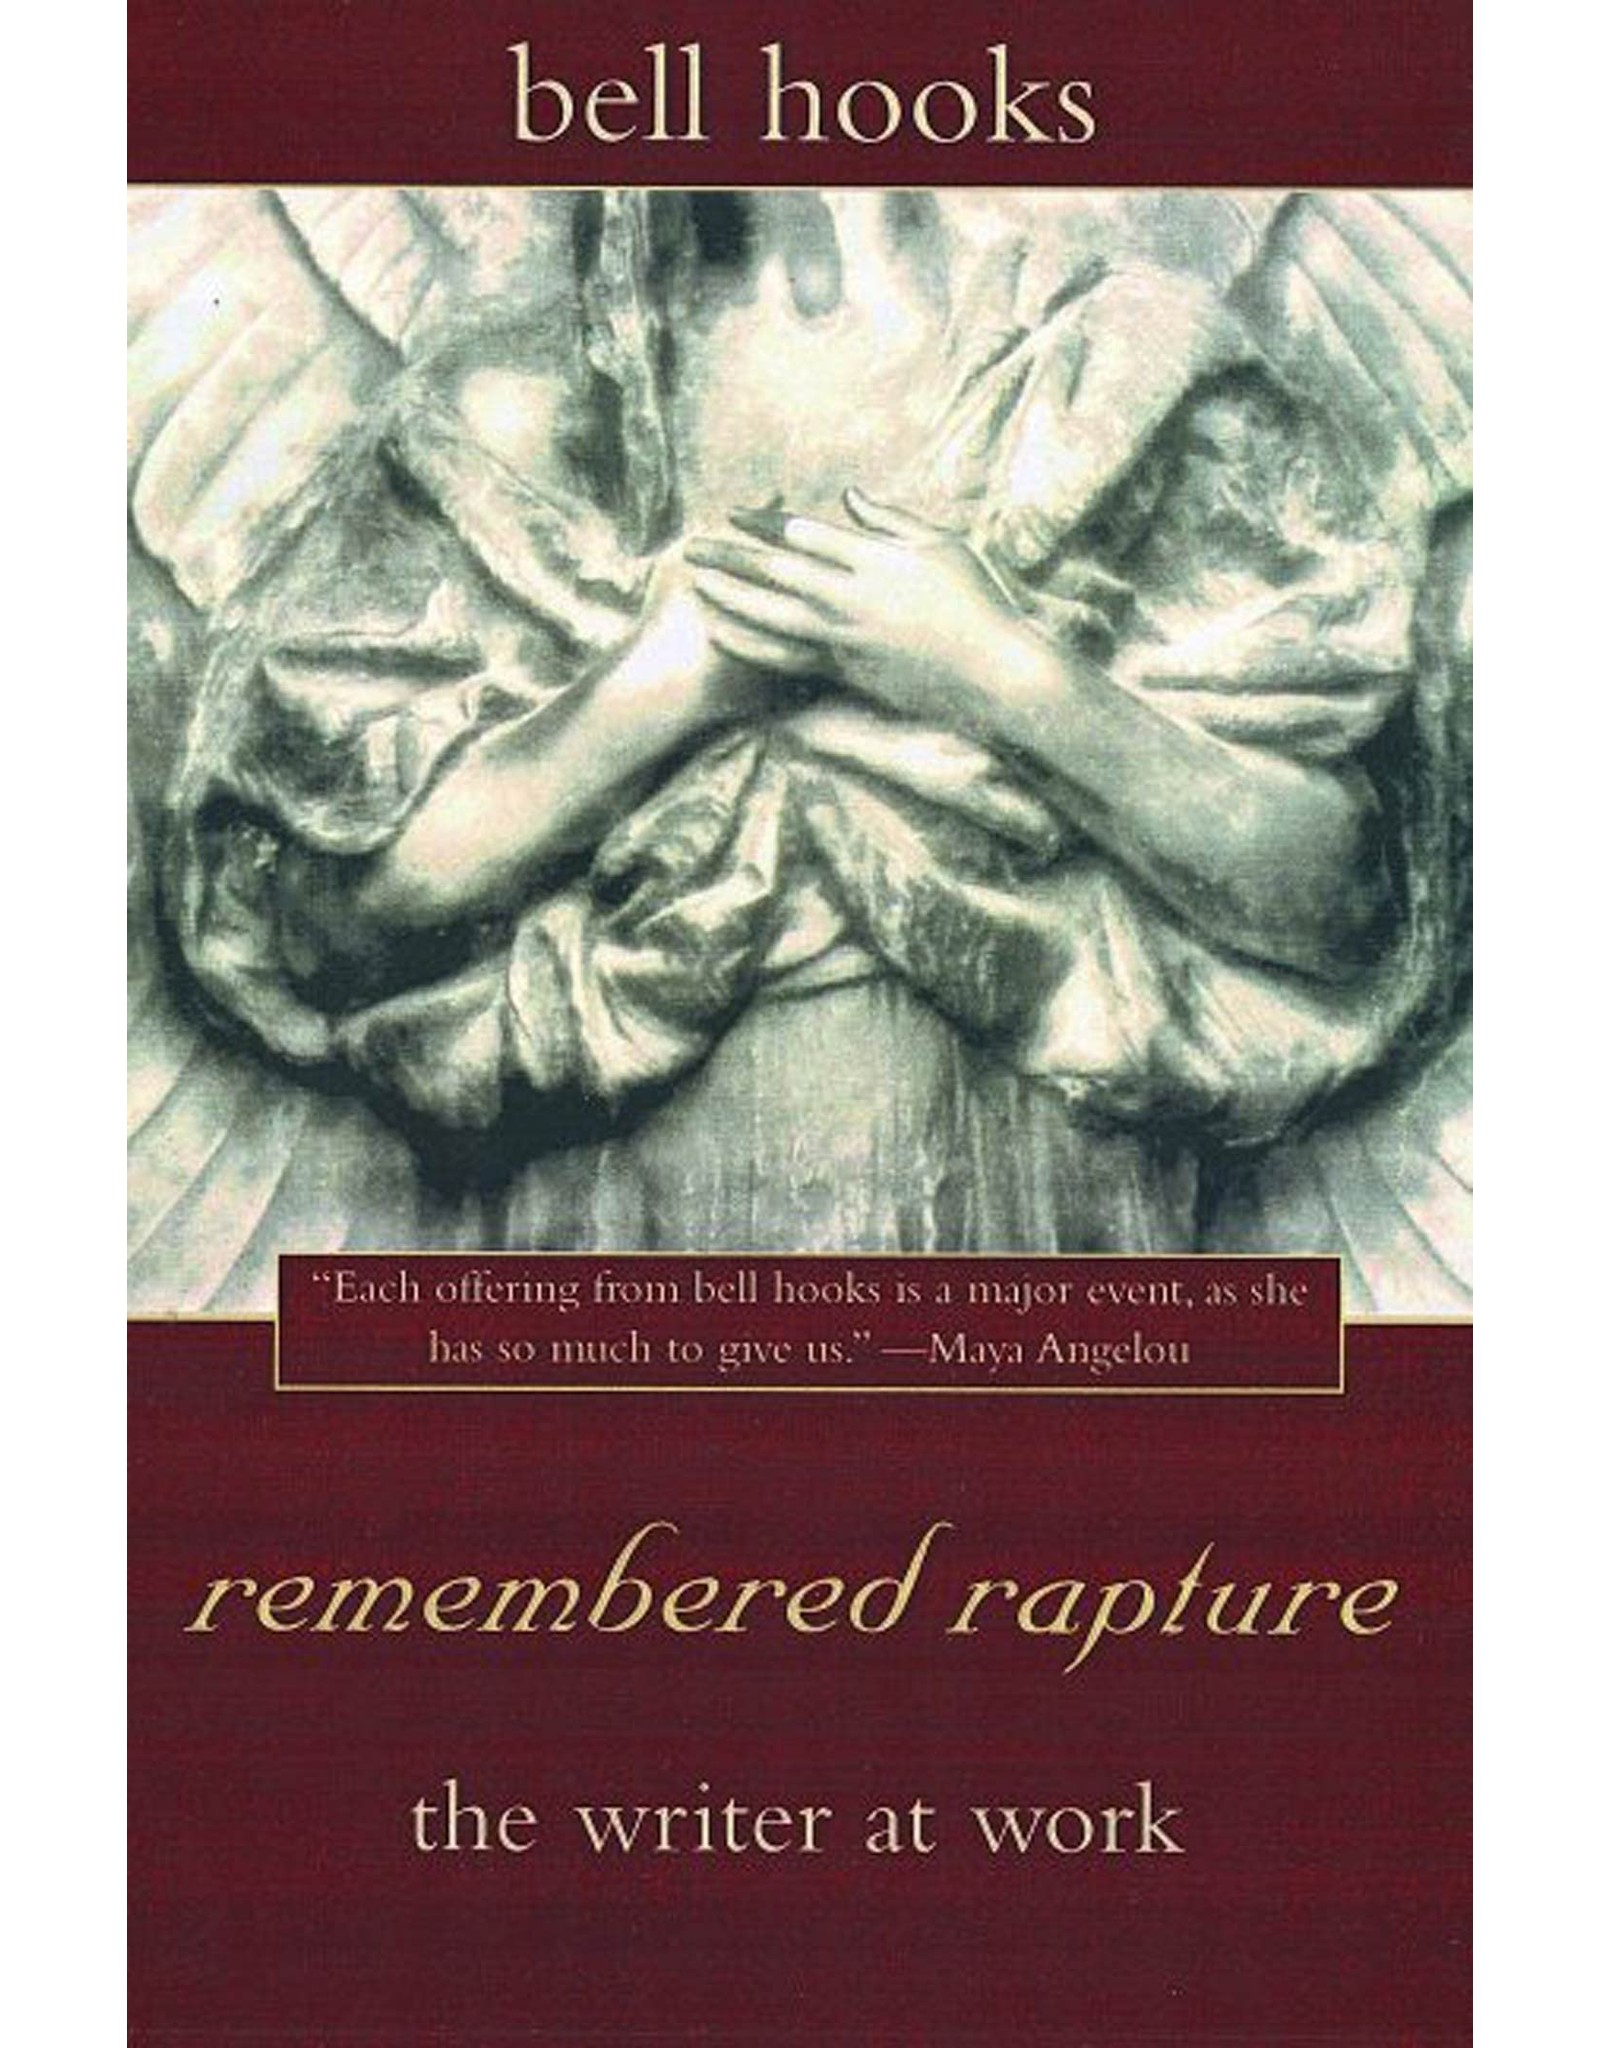 Literature remembered rapture: the writer at work